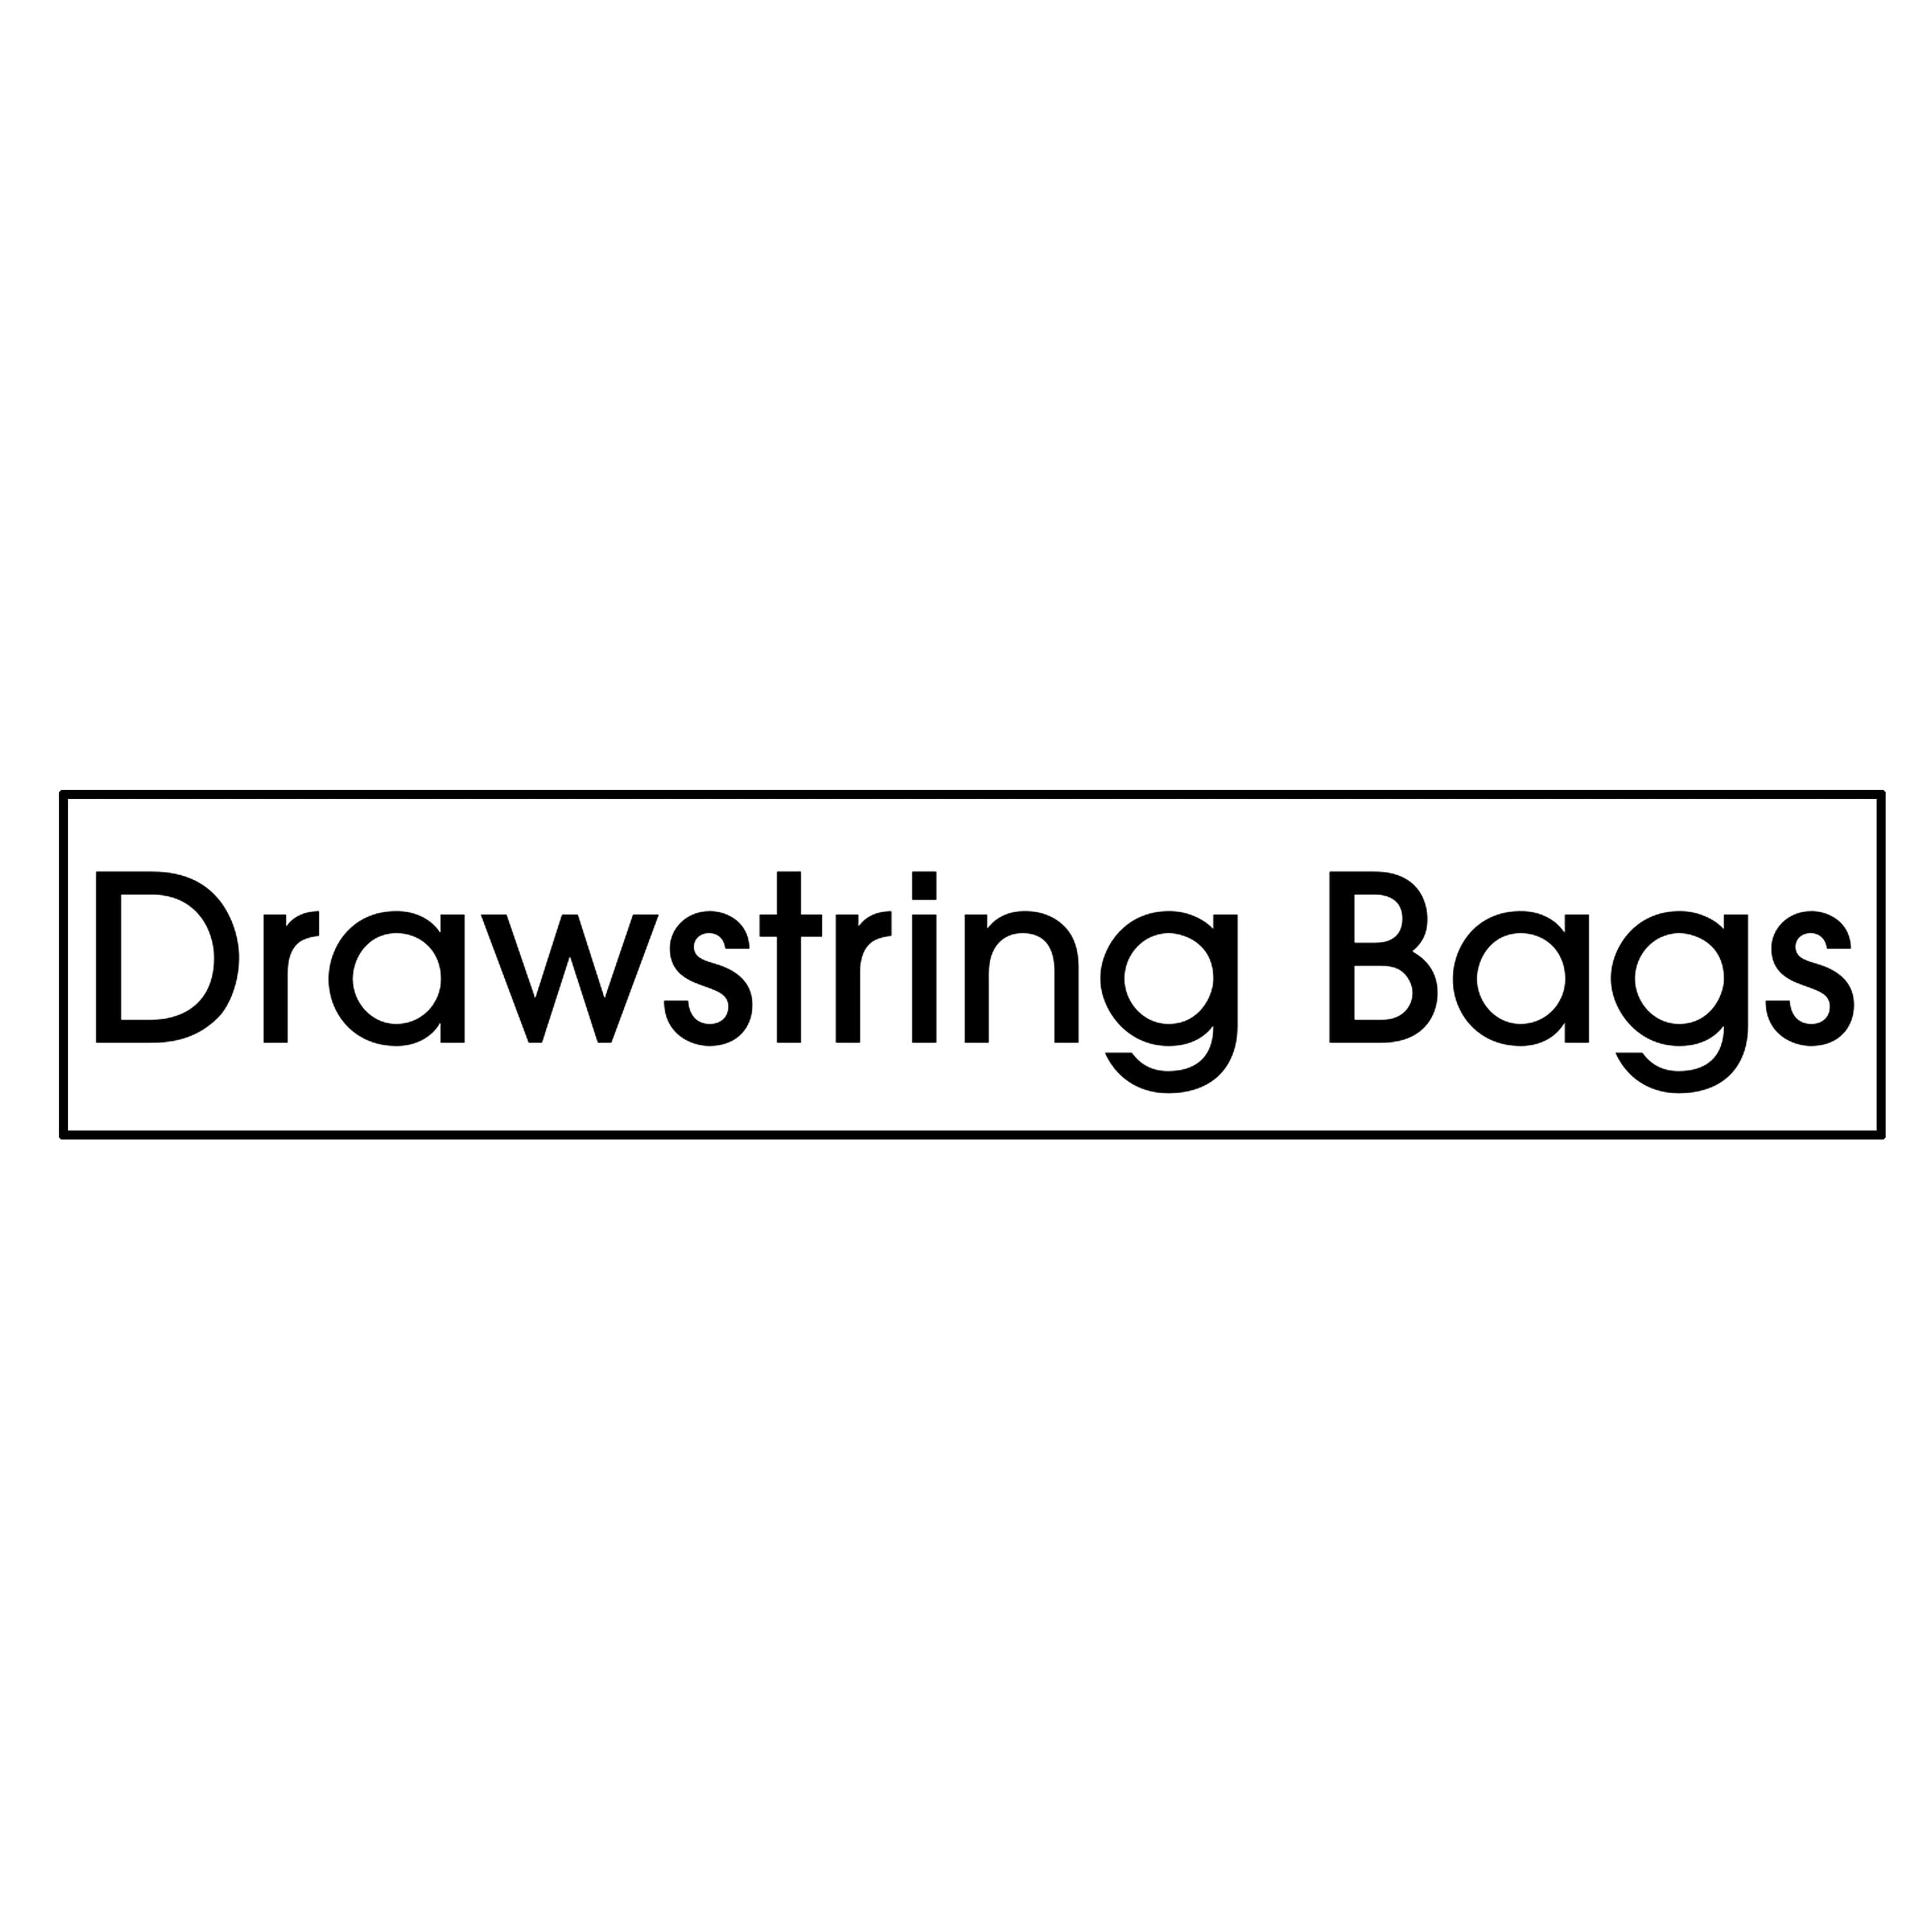 Bomgaars : Jadcore Drawstring Kitchen Bags, White, 40-Count